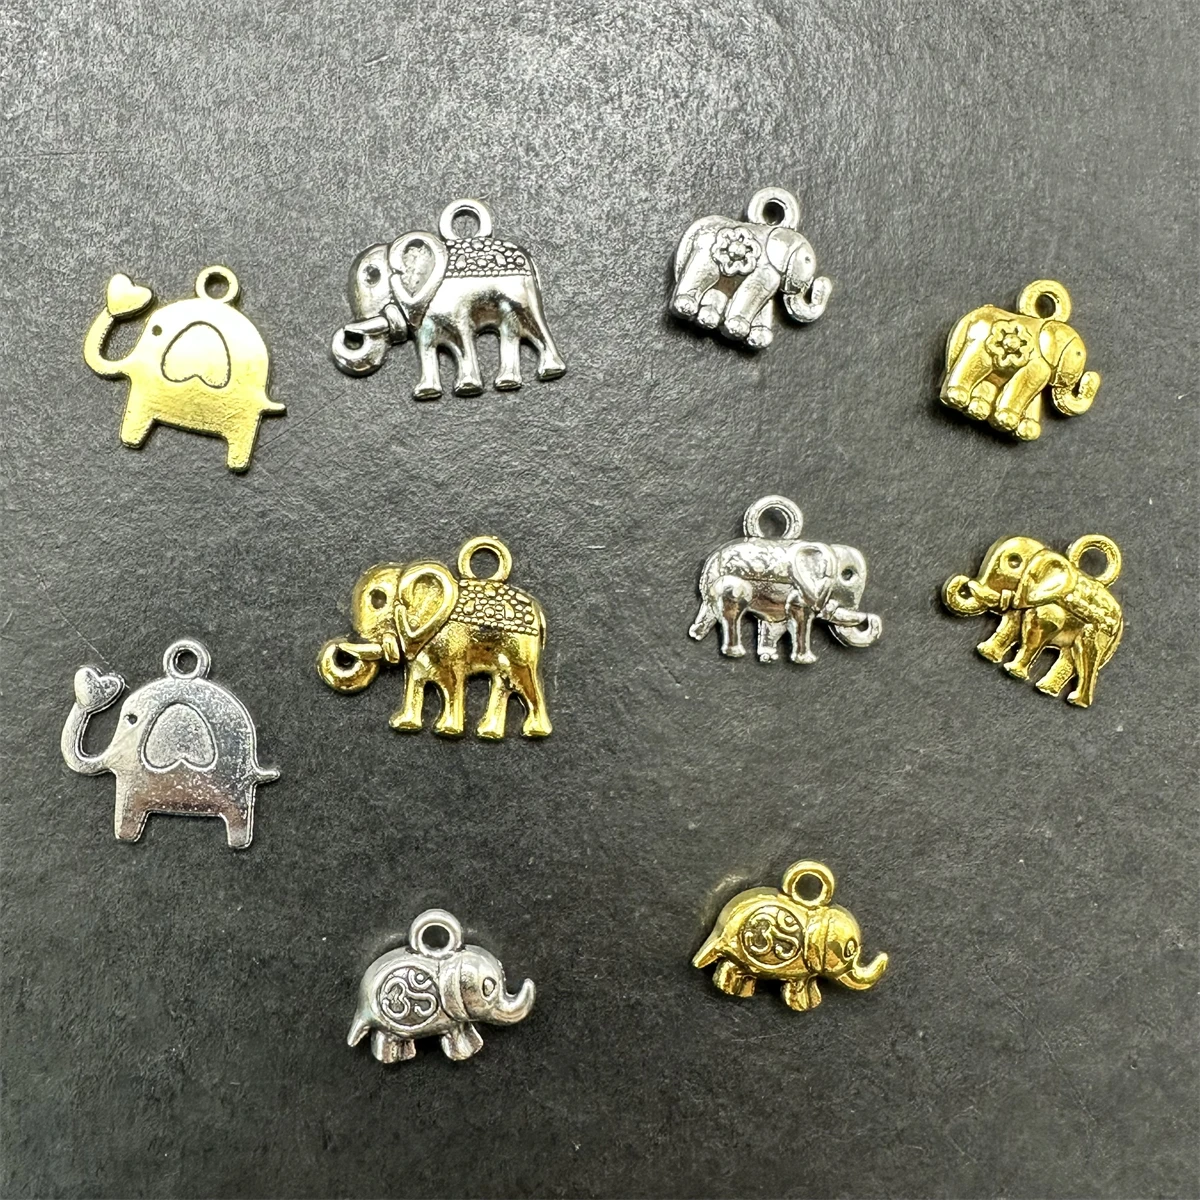 

20pcs Charming Pop Mini Cute Small Elephant Charms Fit Jewelry Animal Pendant Makings Earring Bracelet Connector Accessories